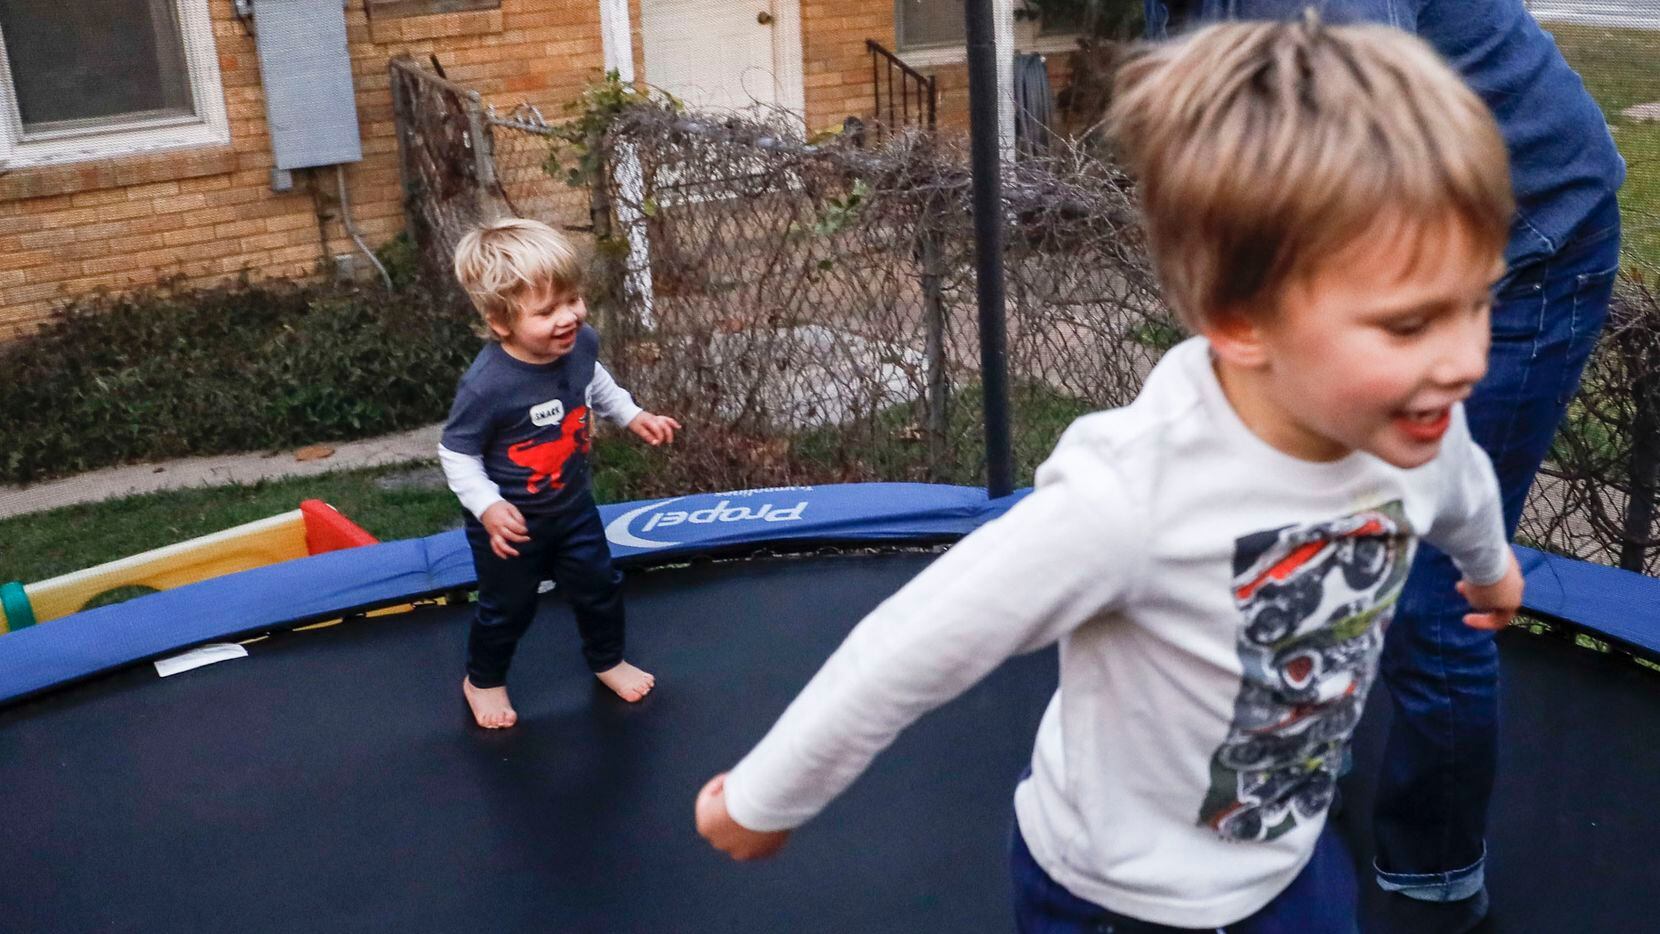 Craig Hoffman plays with his son Roky, 2, as River, 4, jumps next to them on the trampoline...